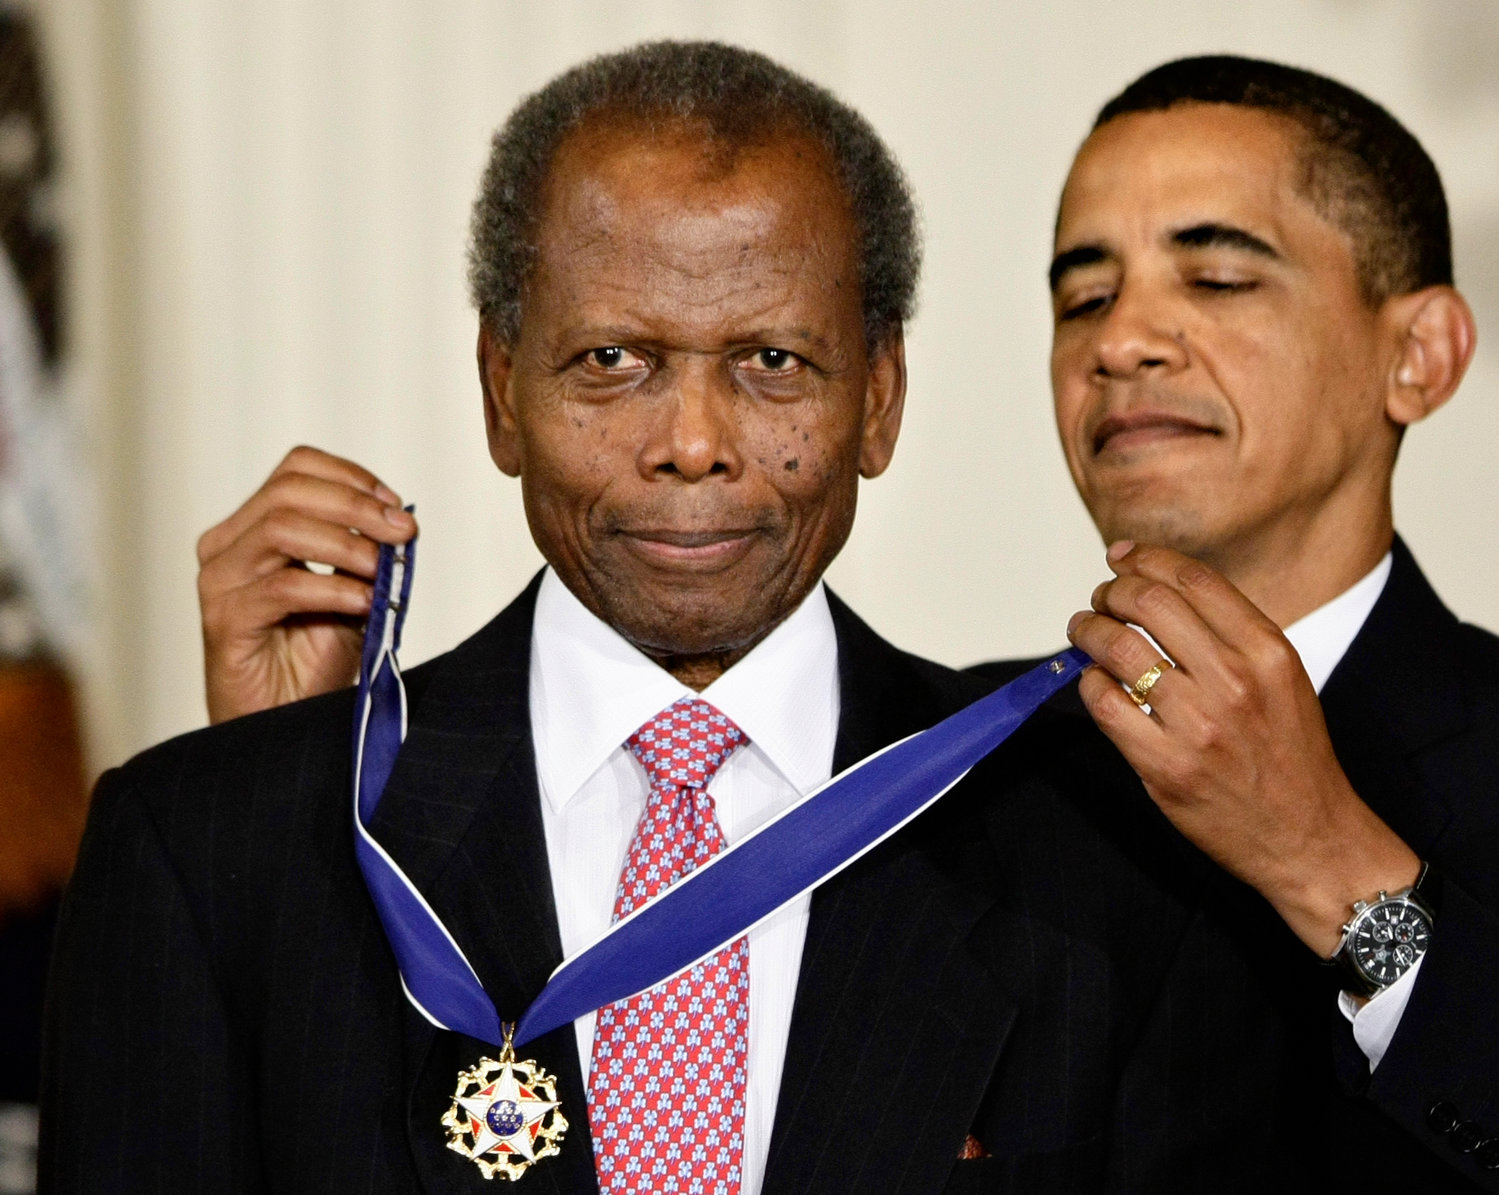 FILE - President Barack Obama, right, presents the 2009 Presidential Medal of Freedom to Sidney Poitier during ceremonies in the East Room at the White House in Washington on Aug. 12, 2009. Among the entertainers who died in 2022 was groundbreaking actor Poitier, who played roles with such dignity that it helped change the way Black people were portrayed on screen. Poitier, who died in January, became the first Black actor to win the Academy Award for Best Actor for his role in the 1963 film ‚ÄúLilies of the Field." (AP Photo/J. Scott Applewhite, File)